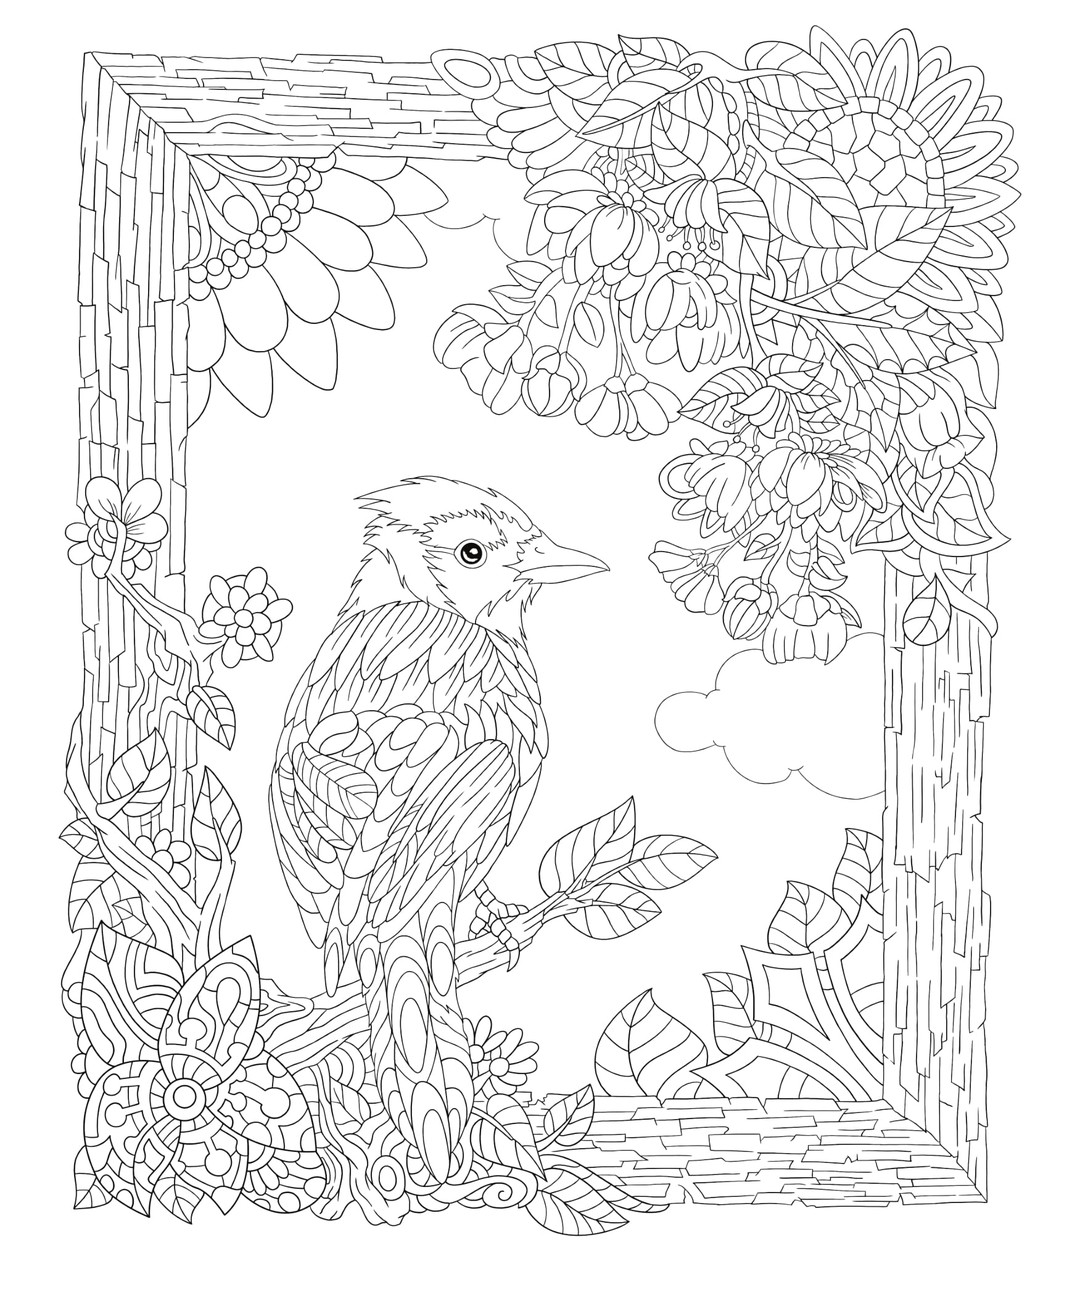 Freebie Friday 06-21-19 Coloring Page